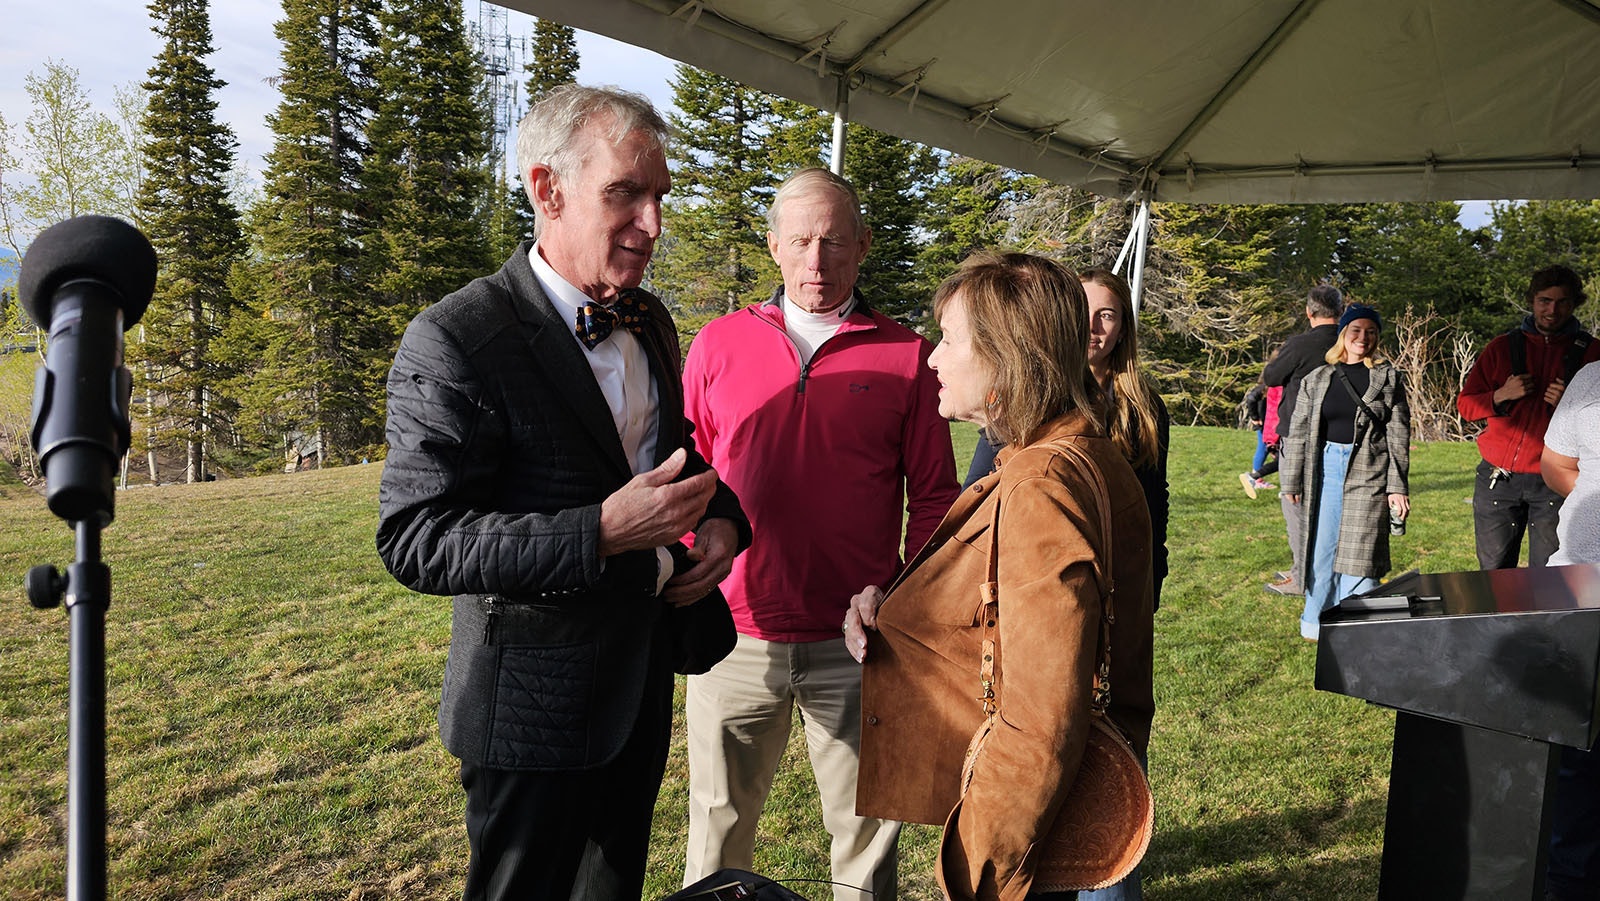 Bill Nye the Science Guy speaks with Max Chapman and his wife and daughter after his speech in Jackson on Saturday to christen the new planetarium.